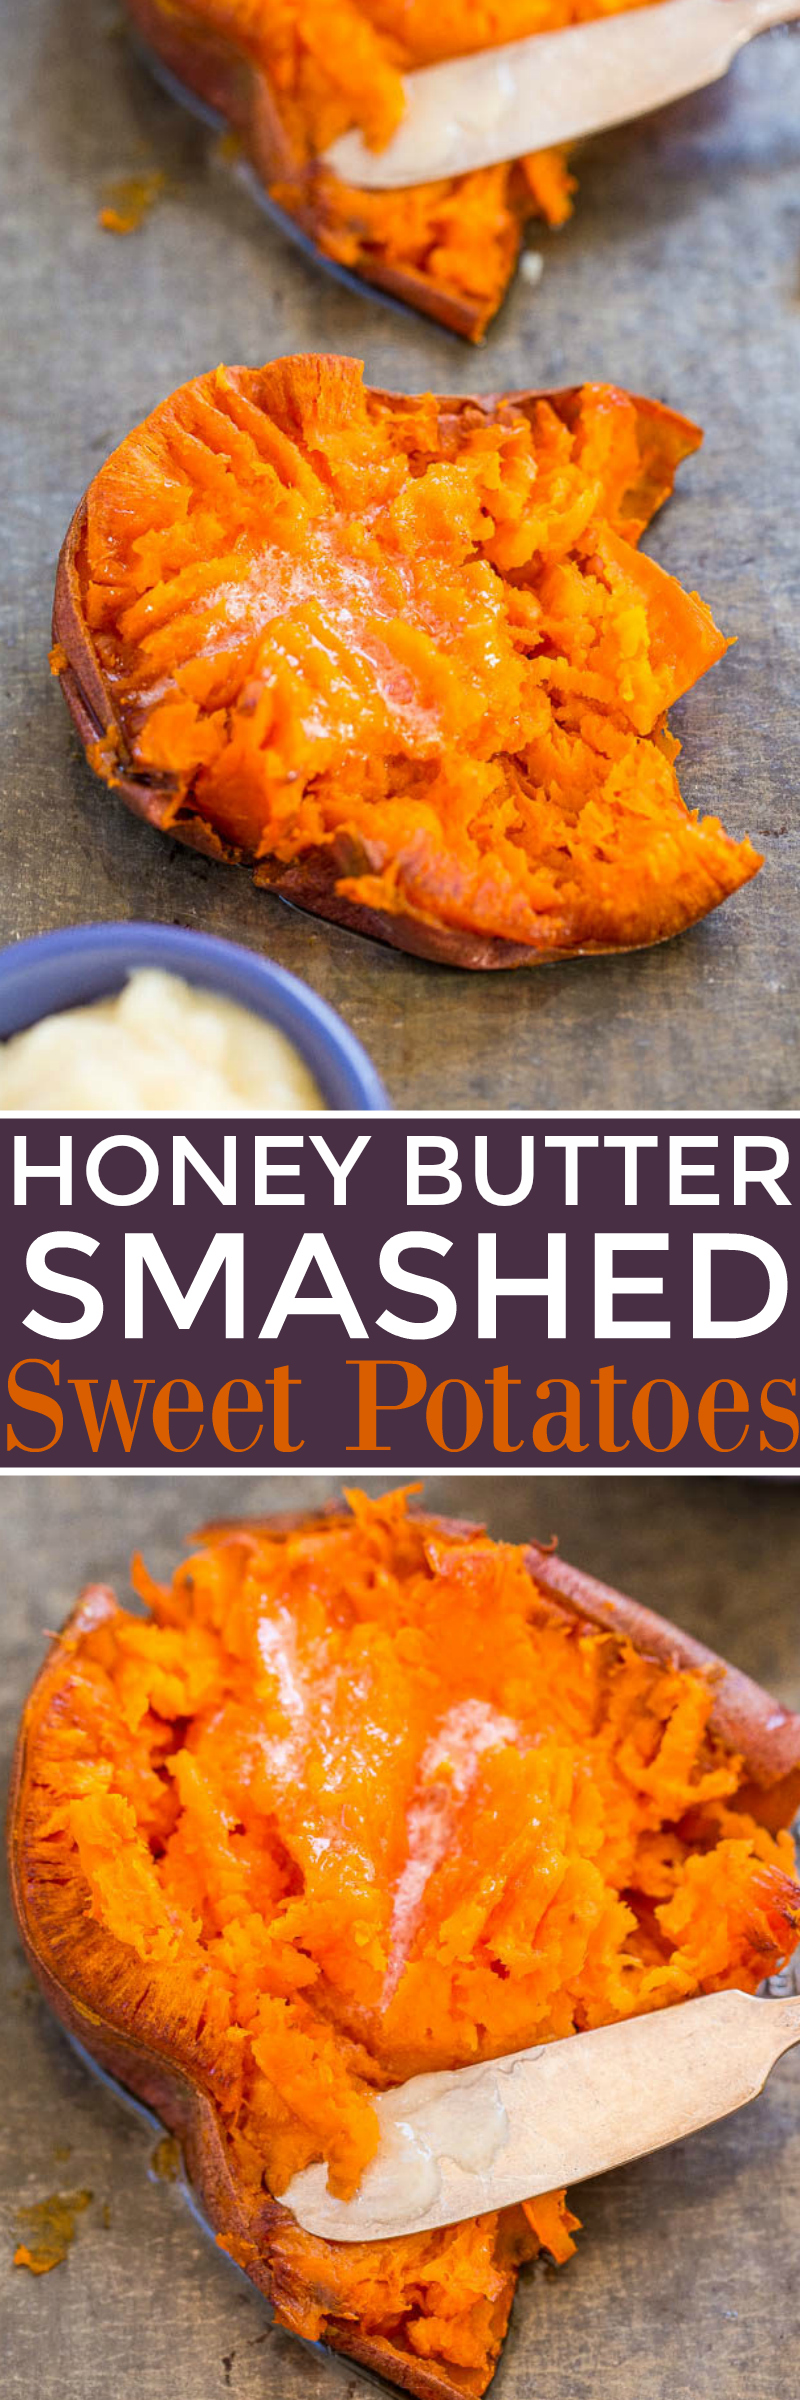 Honey Butter Smashed Sweet Potatoes - Soft, tender potatoes with crispy skin and the most HEAVENLY melted honey butter on top!! EASY comfort food that's a perfect side dish anytime!!